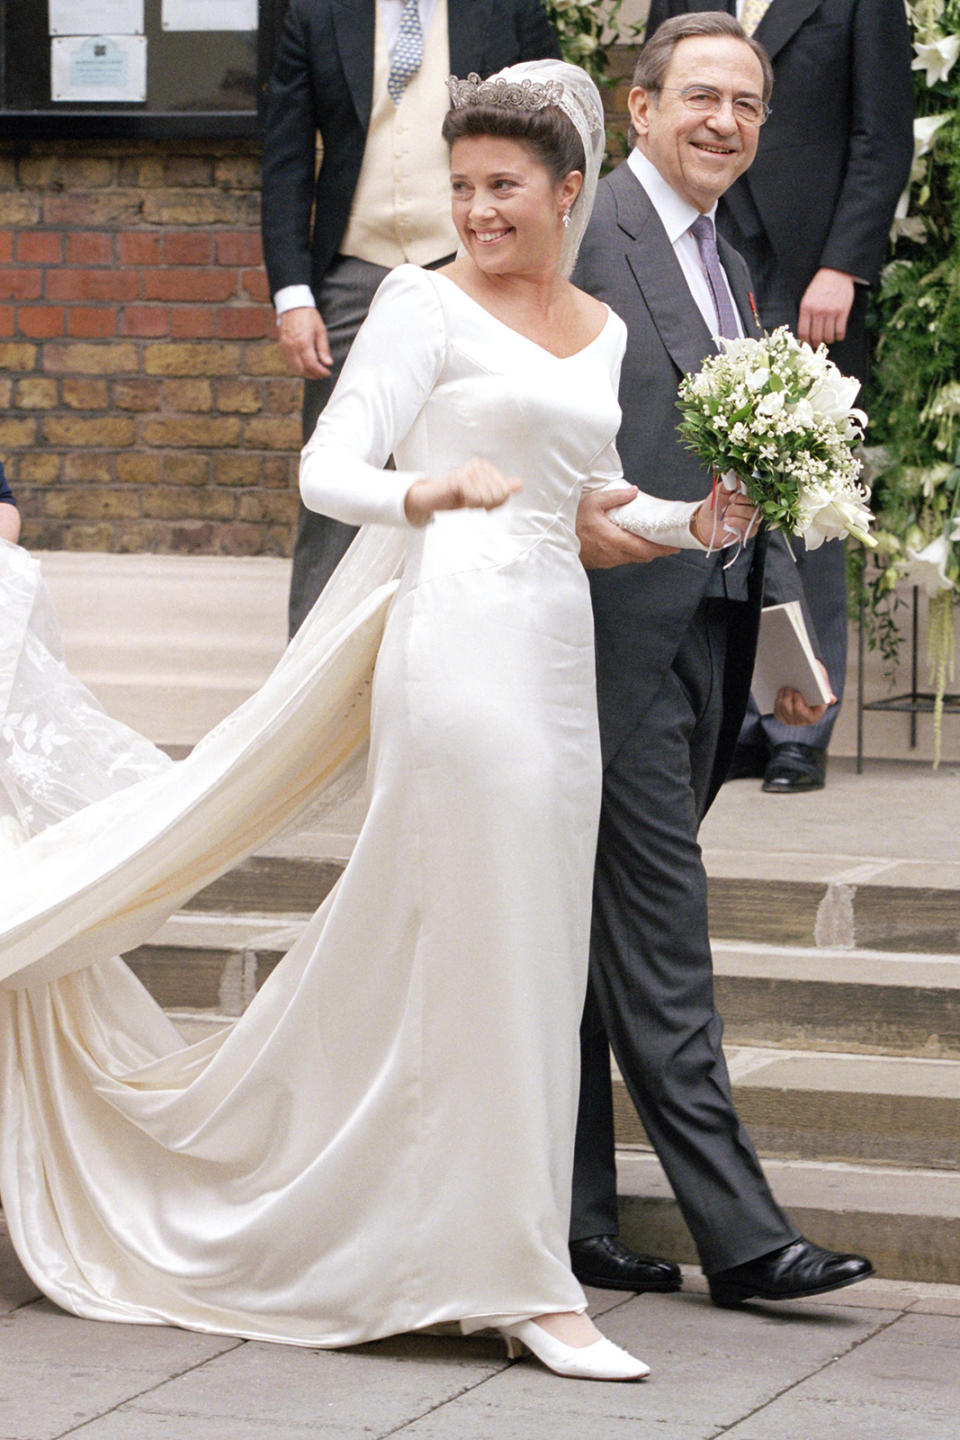 <p> In July 1999, Princess Alexia of Greece and Denmark married Carlos Javier Morales Quintana at St Sophia Catherdal in London. For the occasion, the exiled princess chose a gown by Inge Sprawson, an Austrian designer favoured by her mother, Queen Anne Marie. The elegant white satin column gown was remarkably simple from the front, with long sleeves and a fitted bodice highlighting the Princess’s svelte shape. Flourishes came from the accessories, with the Princess wearing Prince Margaret of Connaught’s lace veil, the Khedive of Egypt tiara and diamond earrings to complement the sleek look. </p>